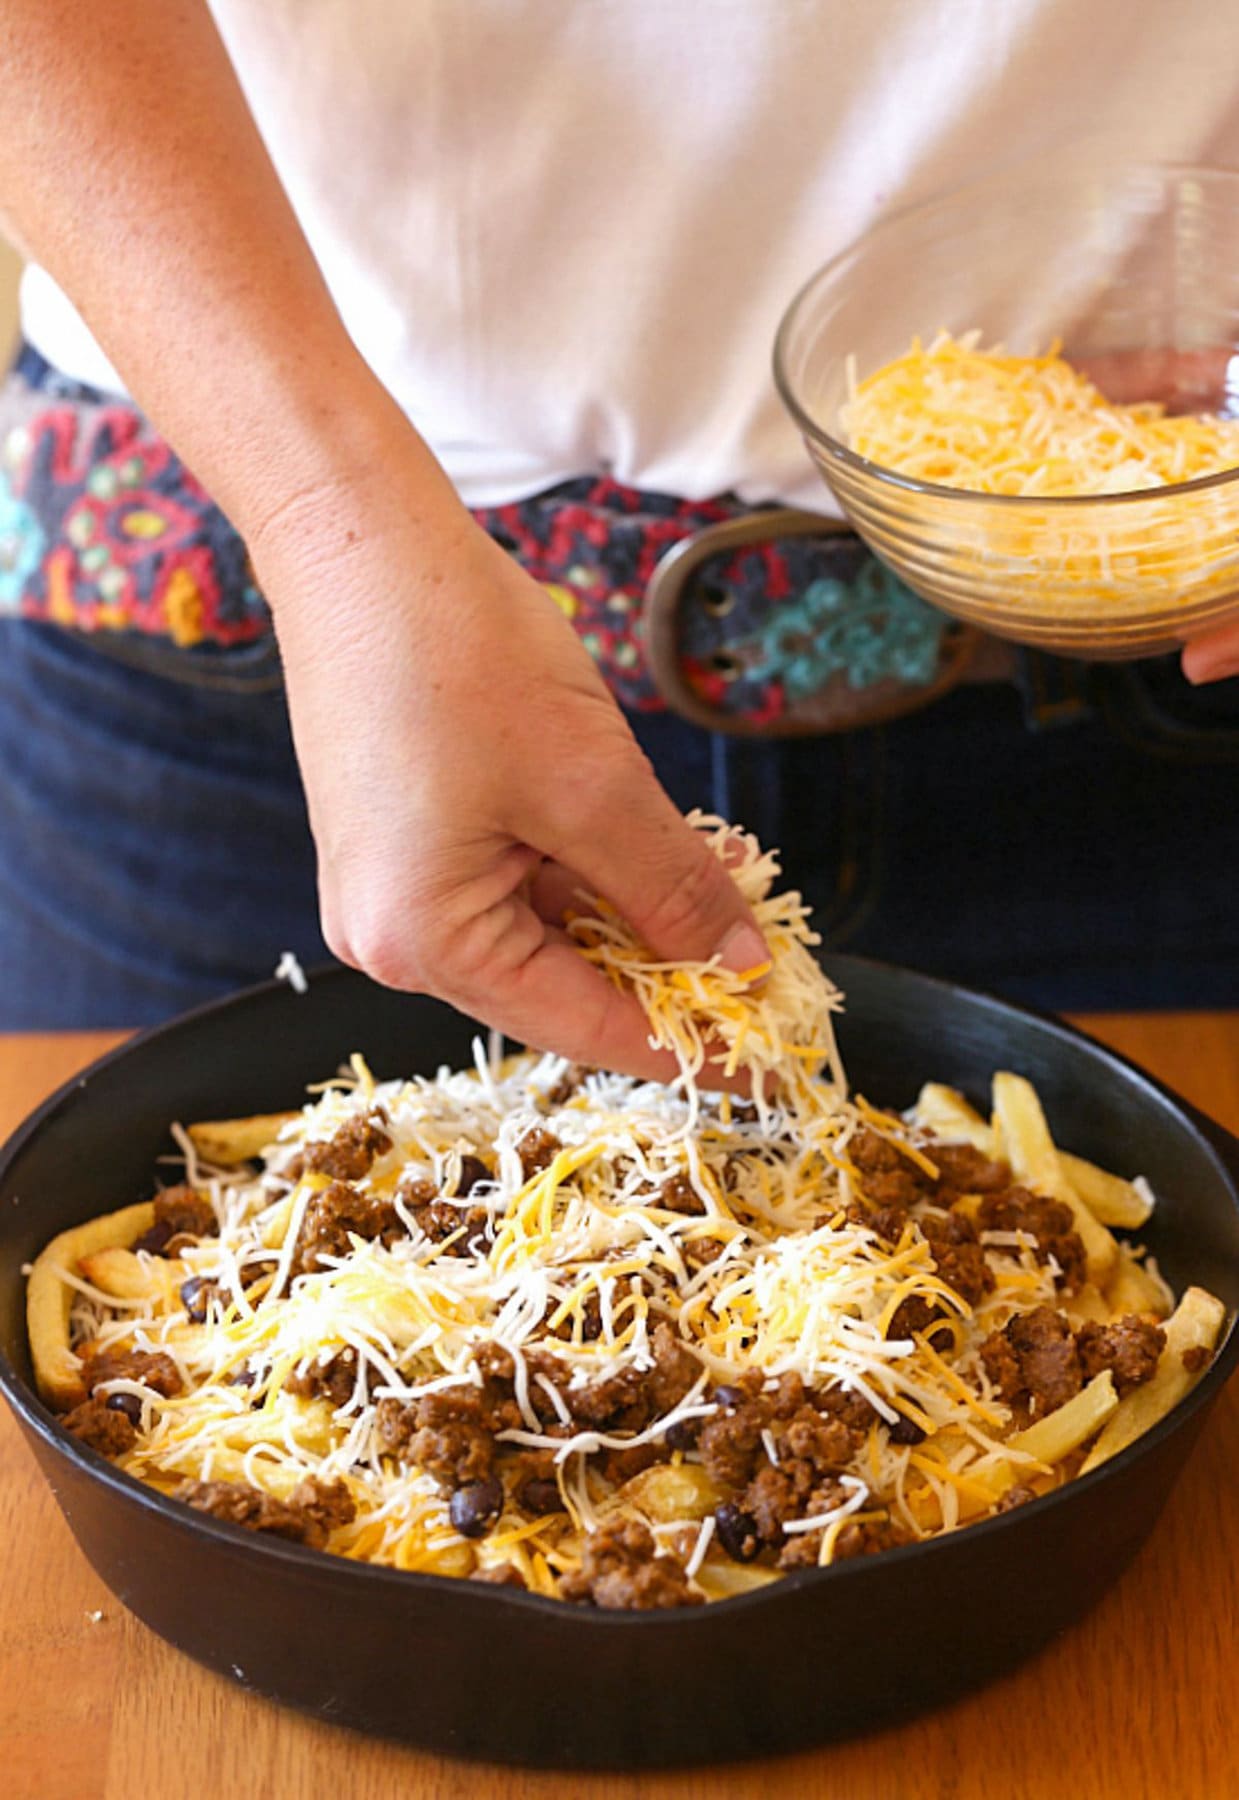 Topping frachos with cheese